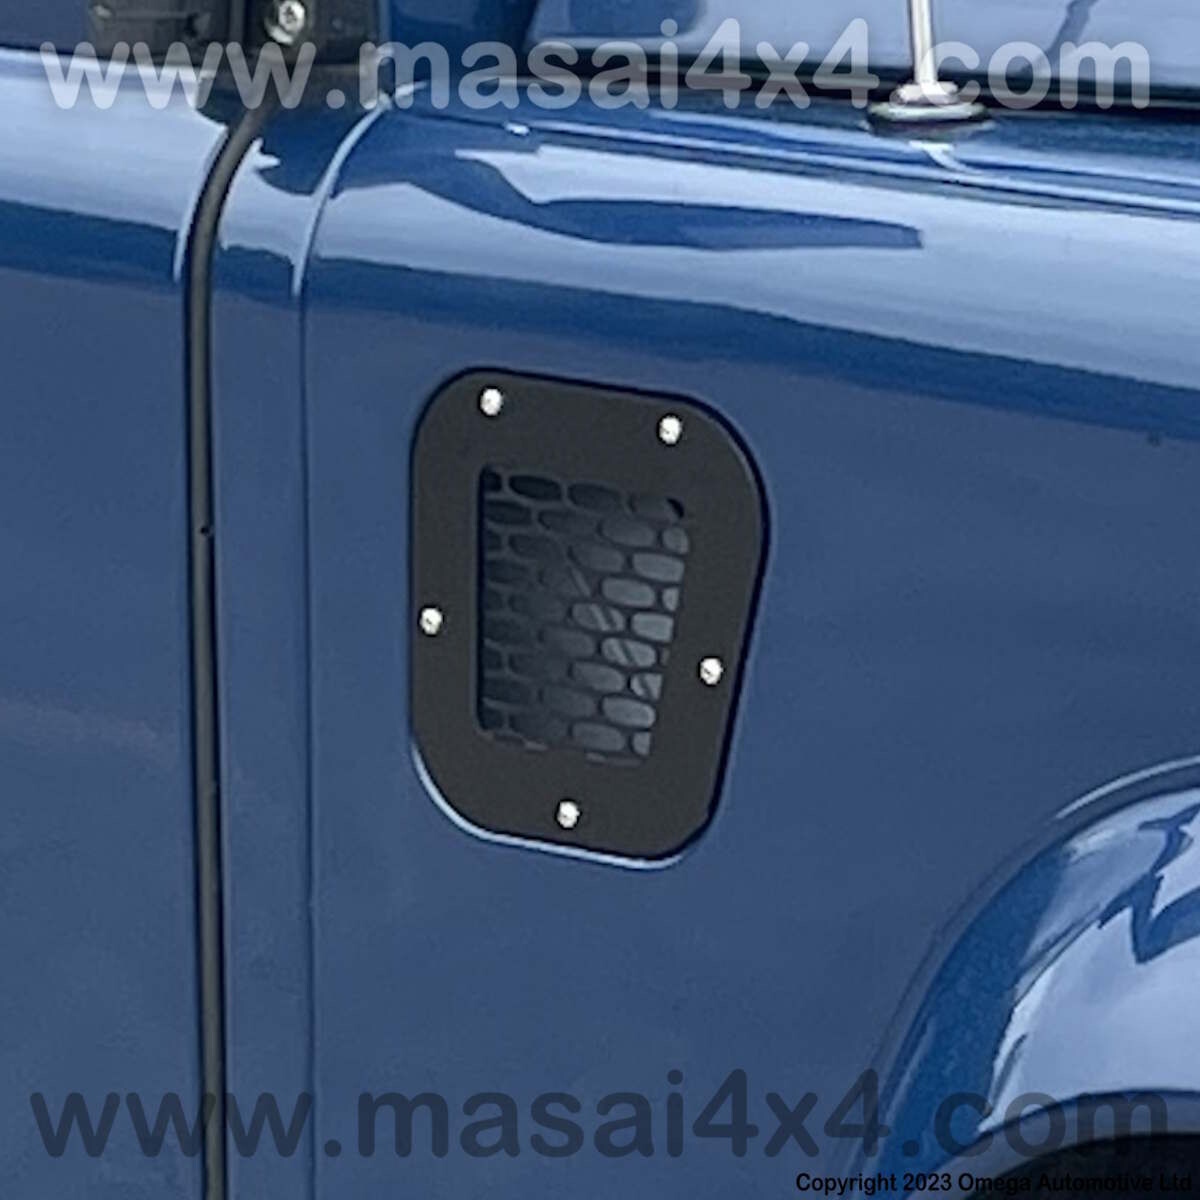 Masai Defender Side Grille - Honeycomb Mesh Stainless Steel